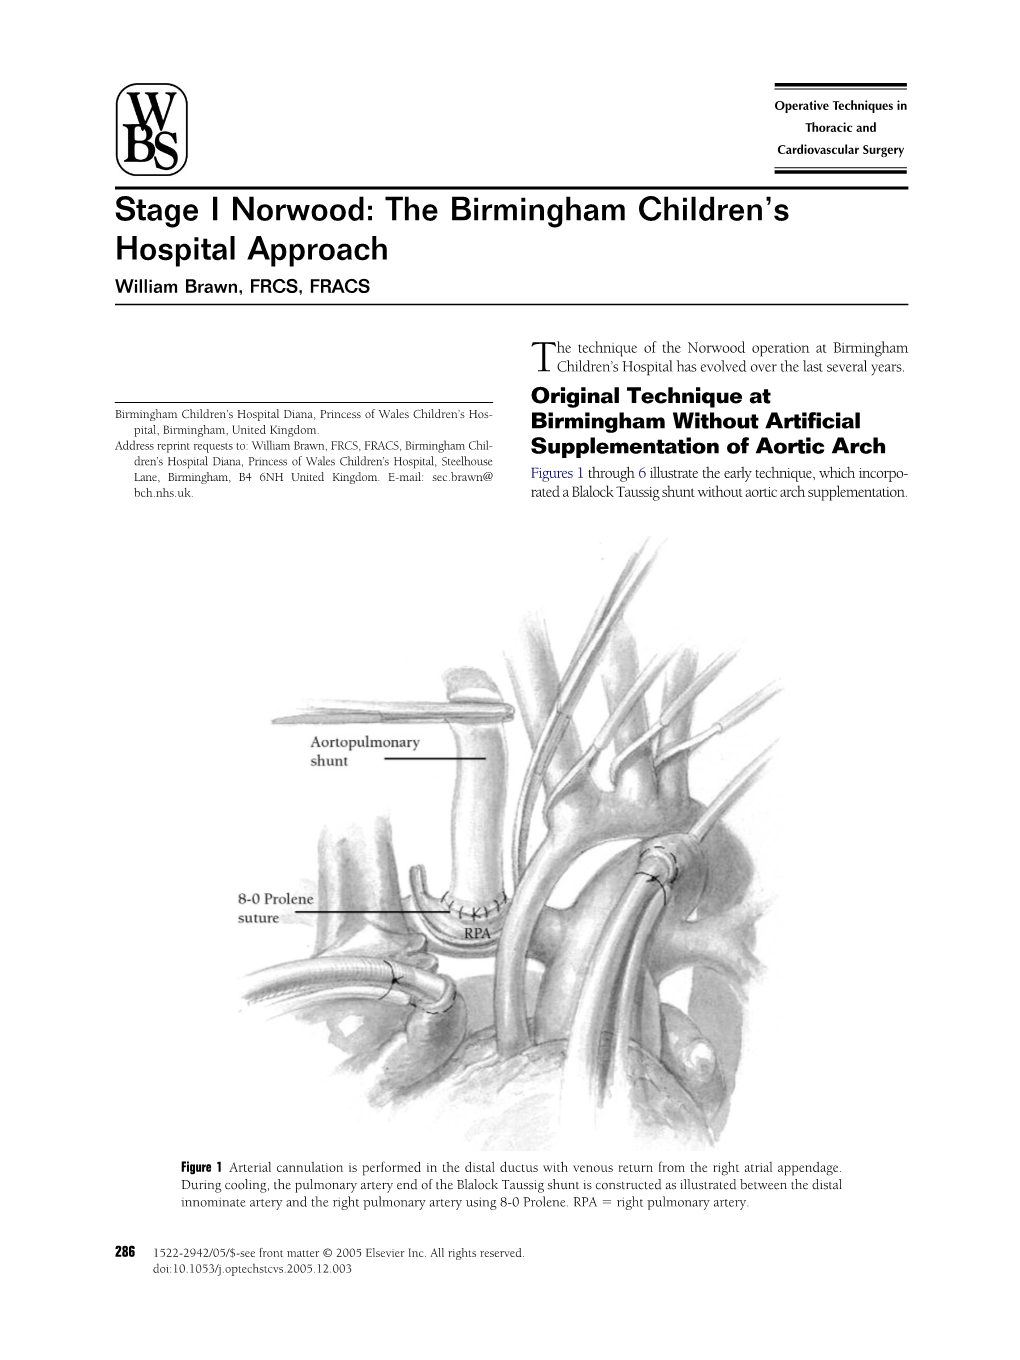 Stage I Norwood: the Birmingham Children's Hospital Approach